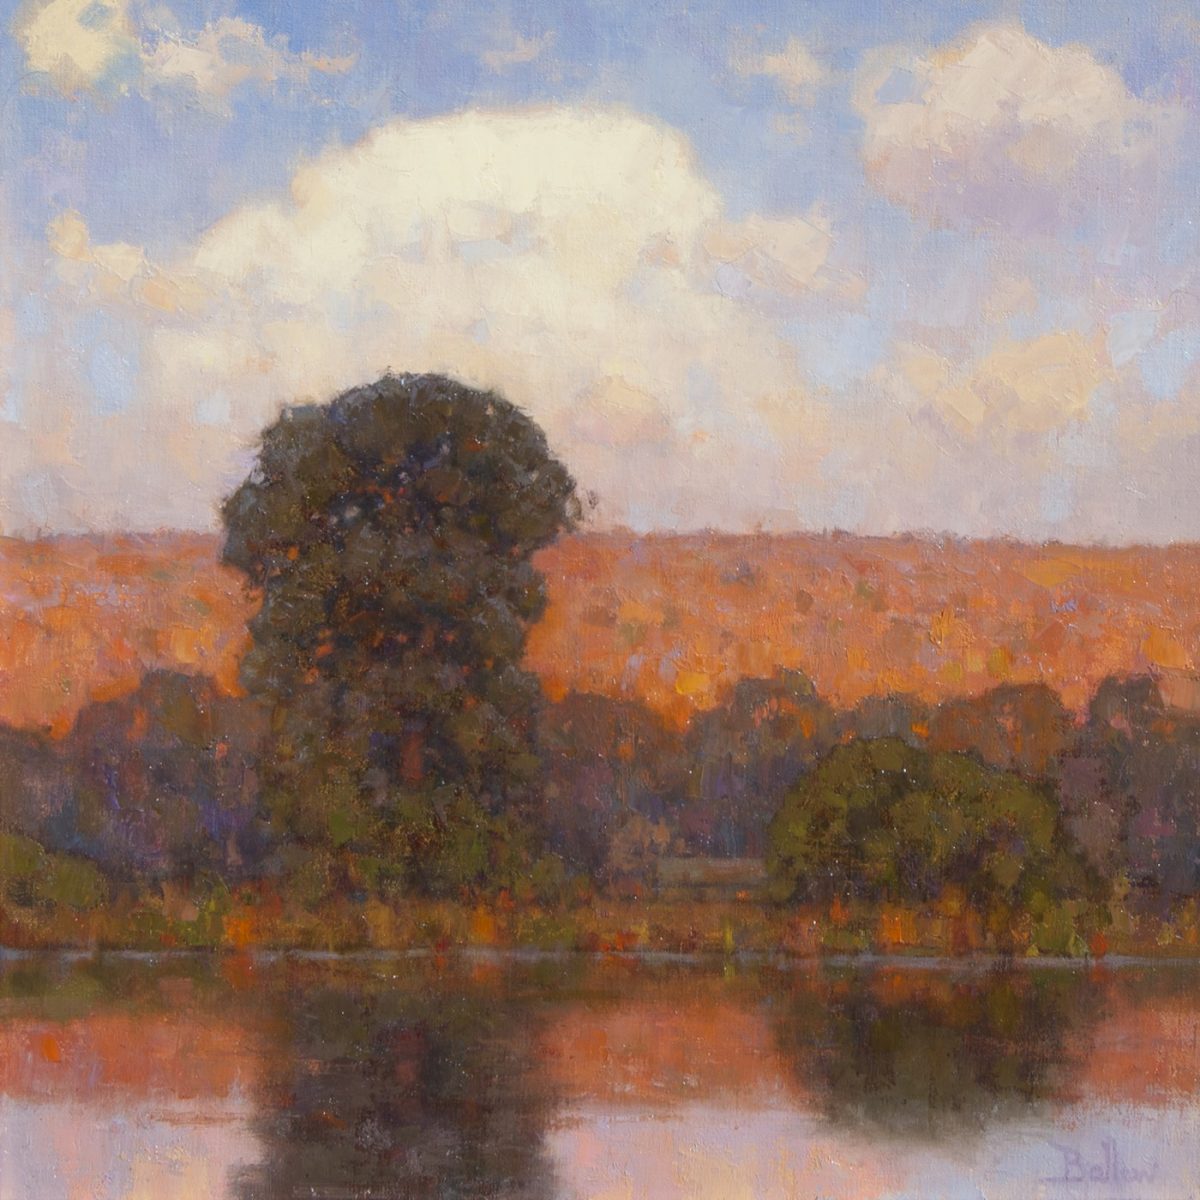 Evening Along the River painting by David Ballew